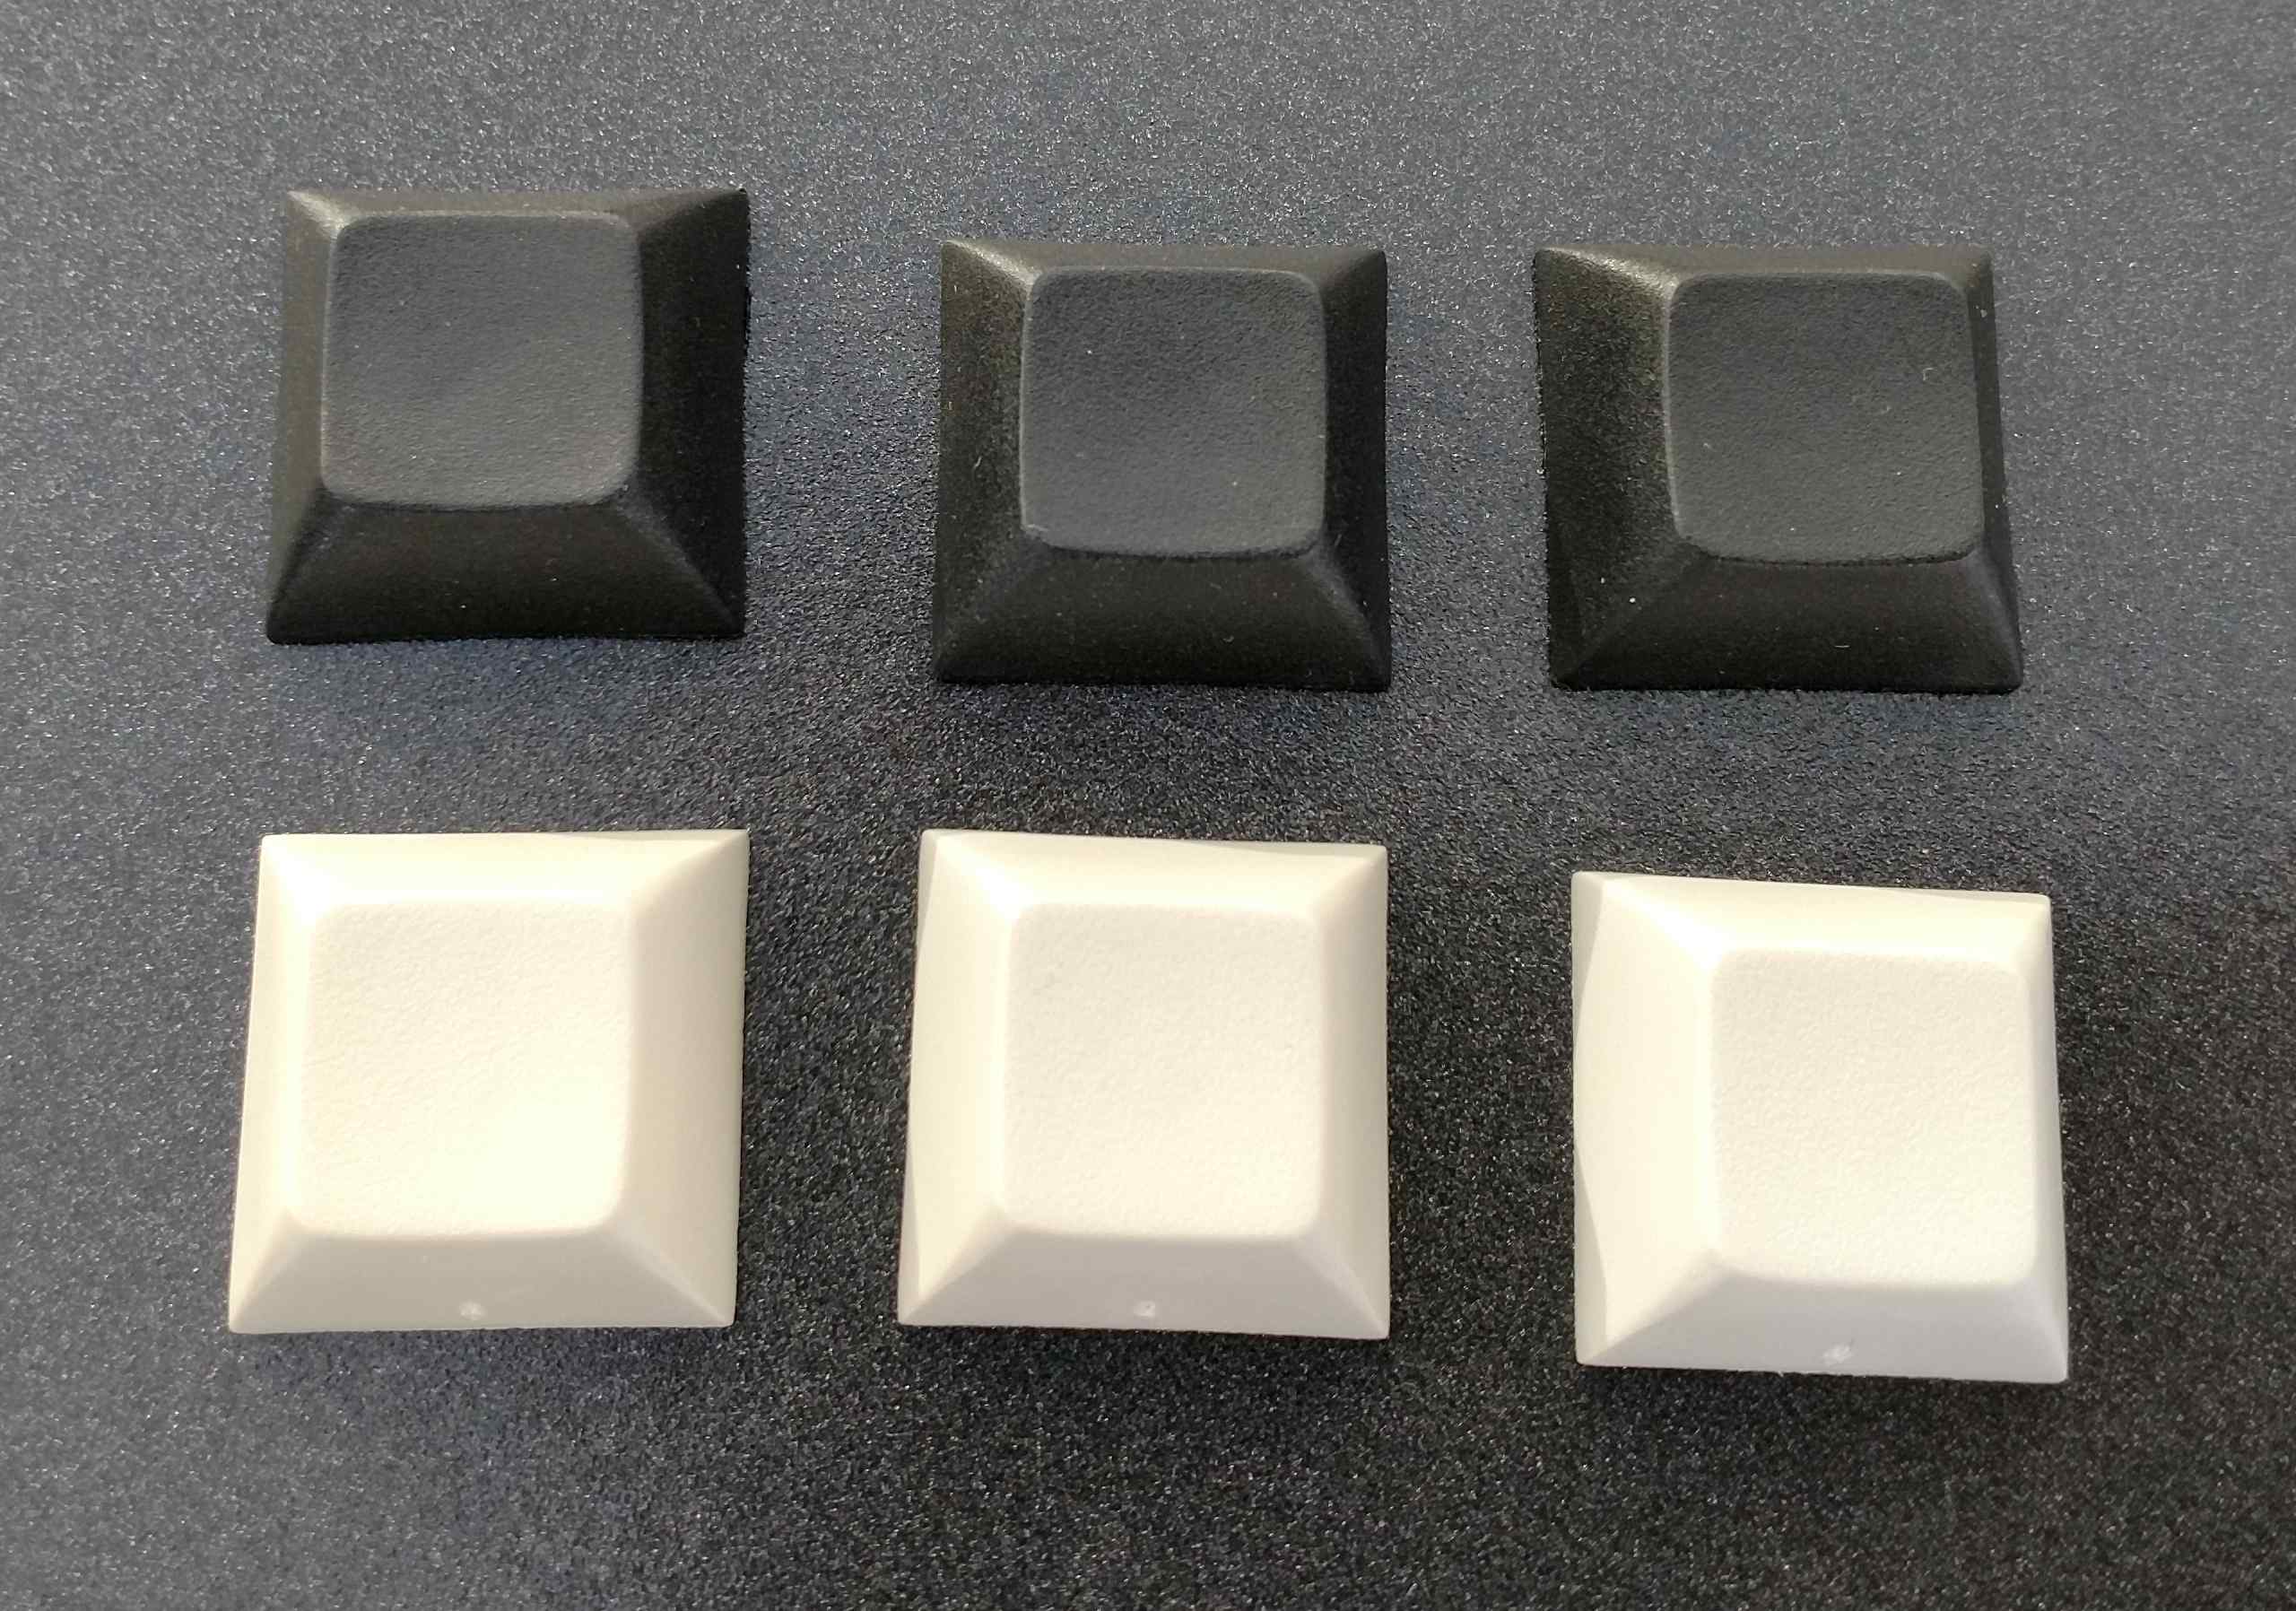 DSA keycaps in black and beige. The beige ones have minor molding imperfections on their sides. Like little braille dots.